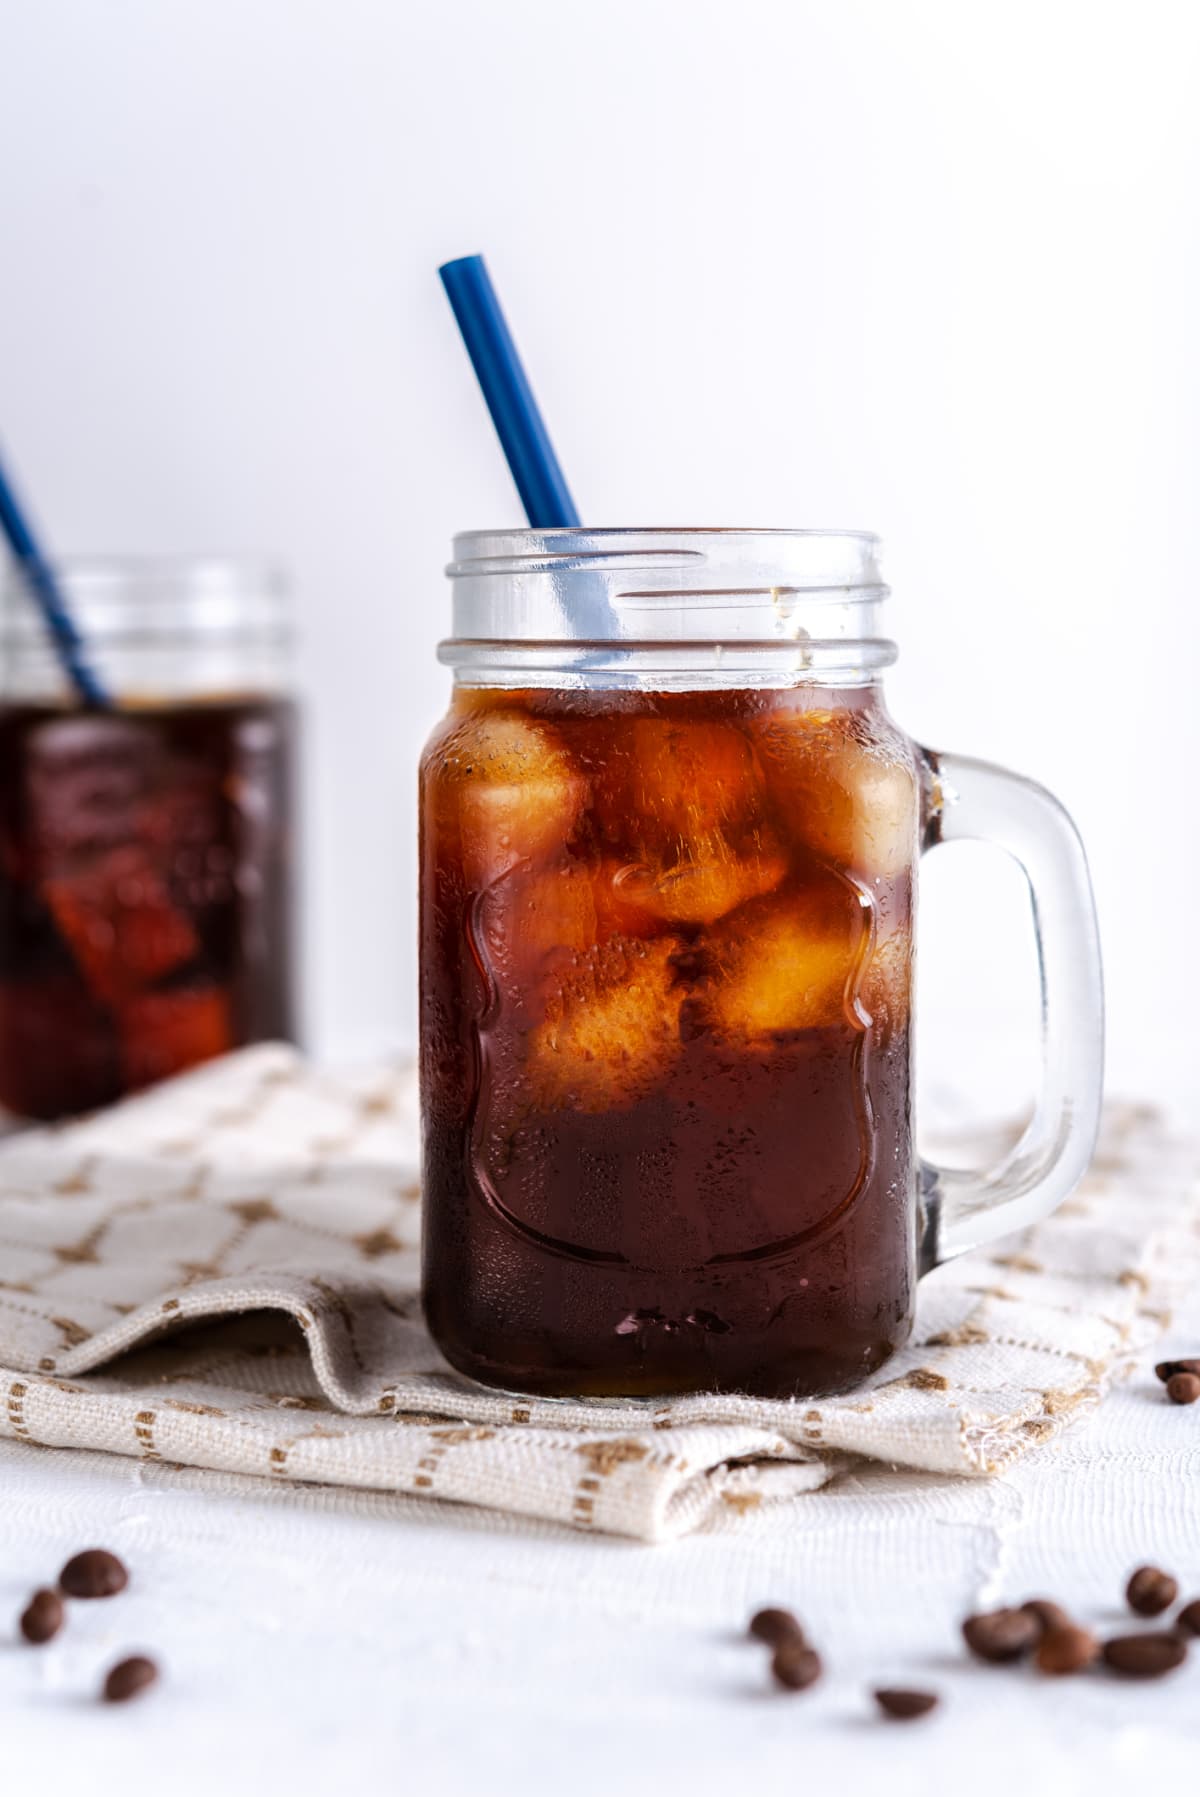 Coffee with ice in a glass mmug with handle on top of cloth napkin with white background